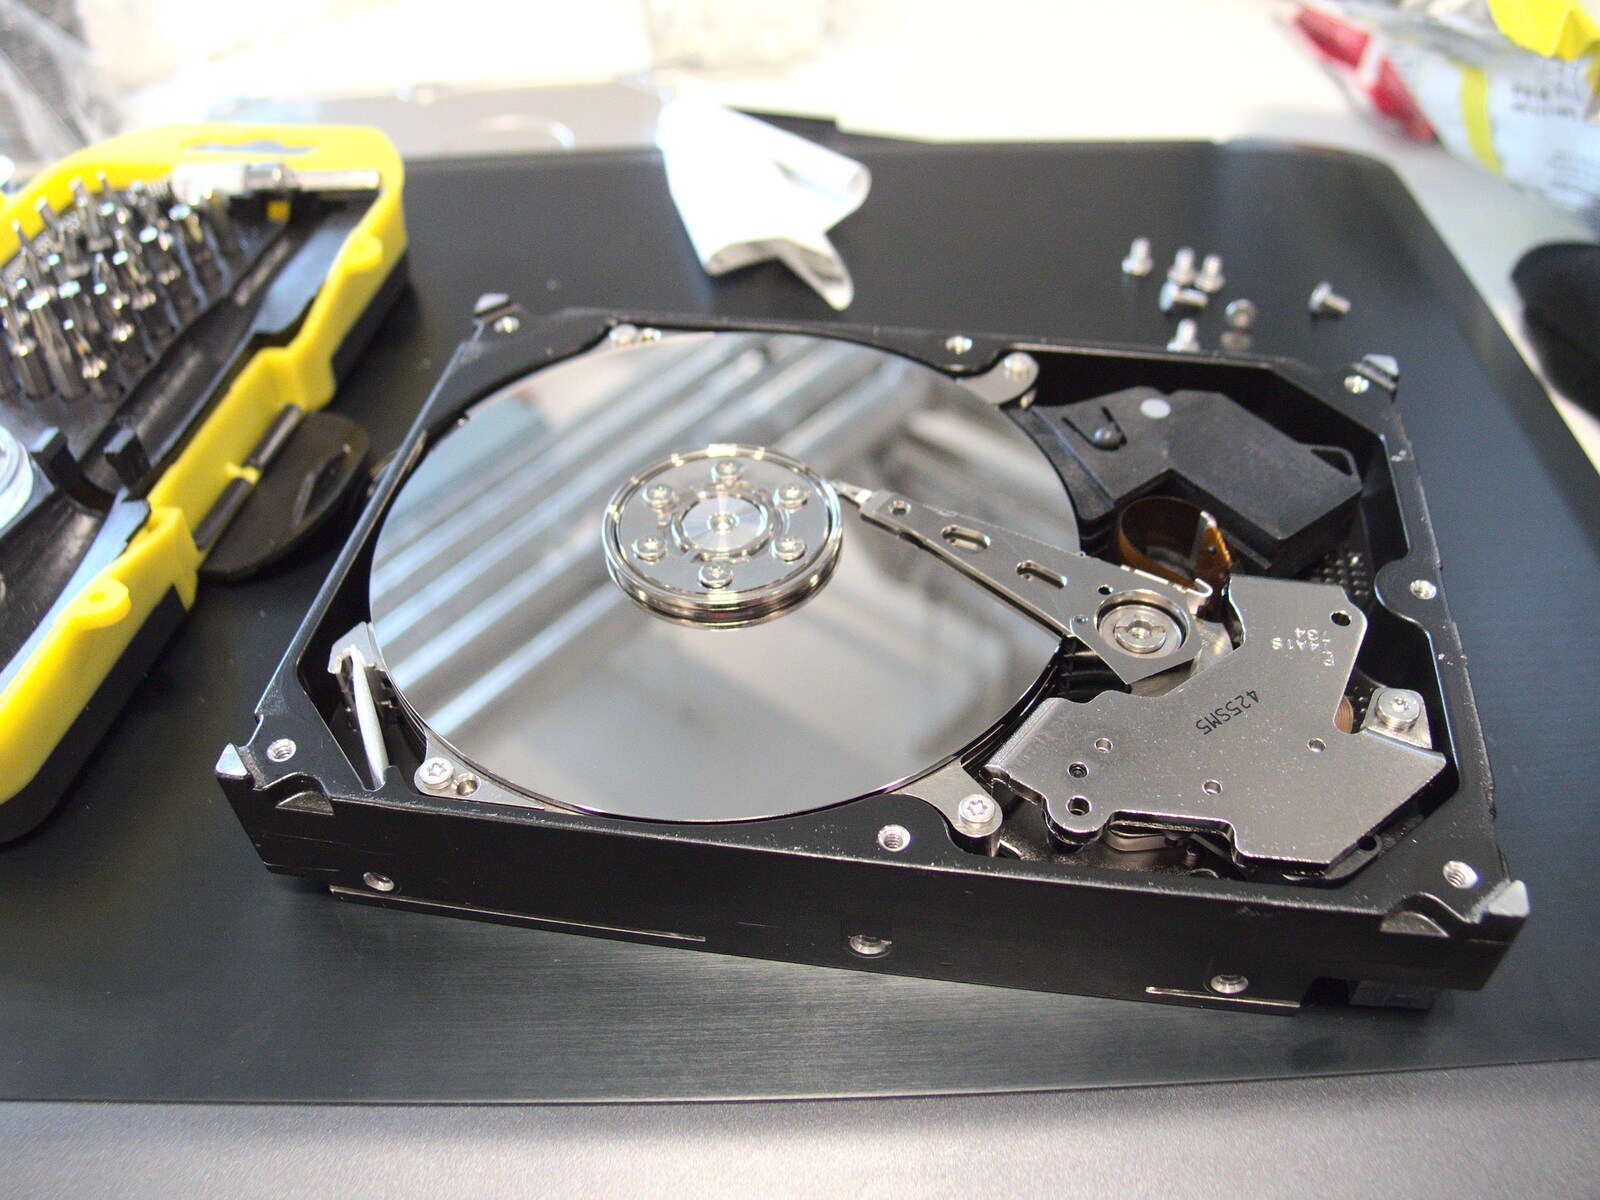 Nosher starts to dis-assemble a 750G hard drive from SwiftKey Innovation Days, The Haymarket, London - 27th June 2014